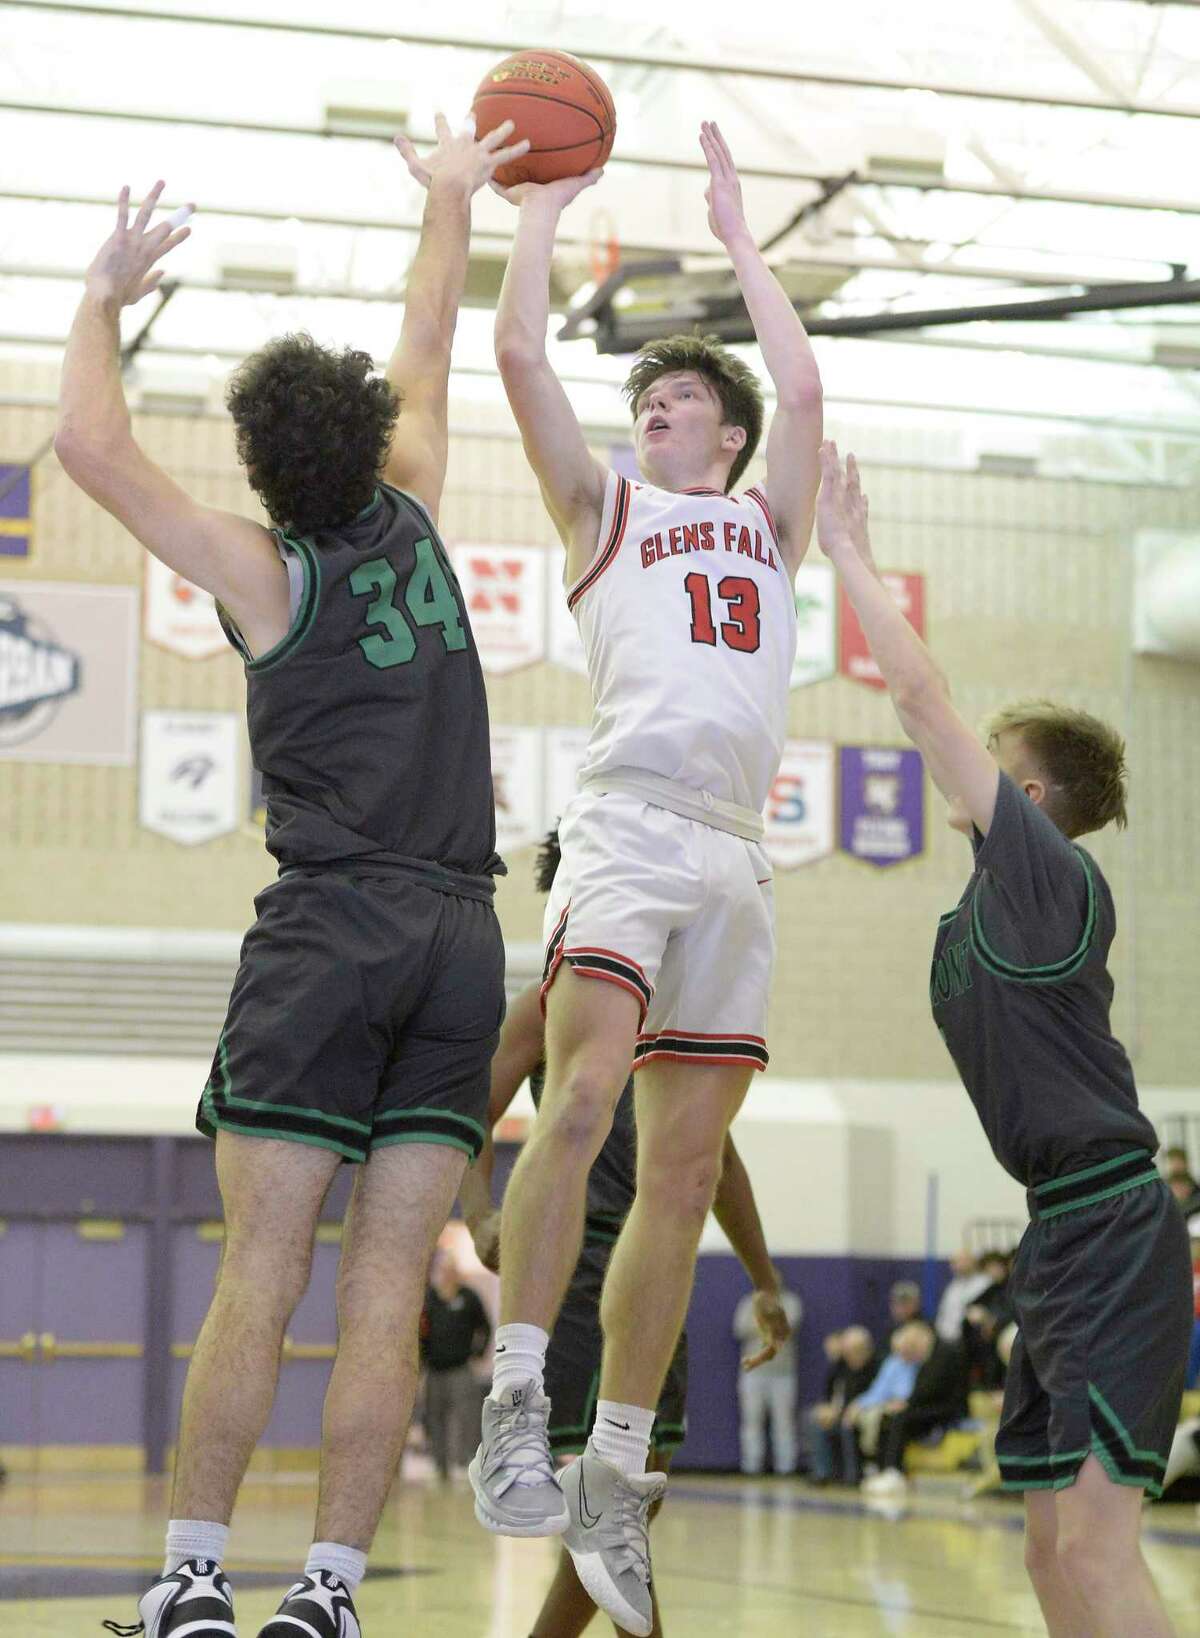 Glens Falls' Kellen Driscoll shoots the ball over the arms of Schalmont's Andrew Schraa during their Class B semifinal game at Ballston Spa High School on Saturday, Feb. 25, 2023, in Ballston Spa, N.Y. (Jenn March, Special to the Times Union)